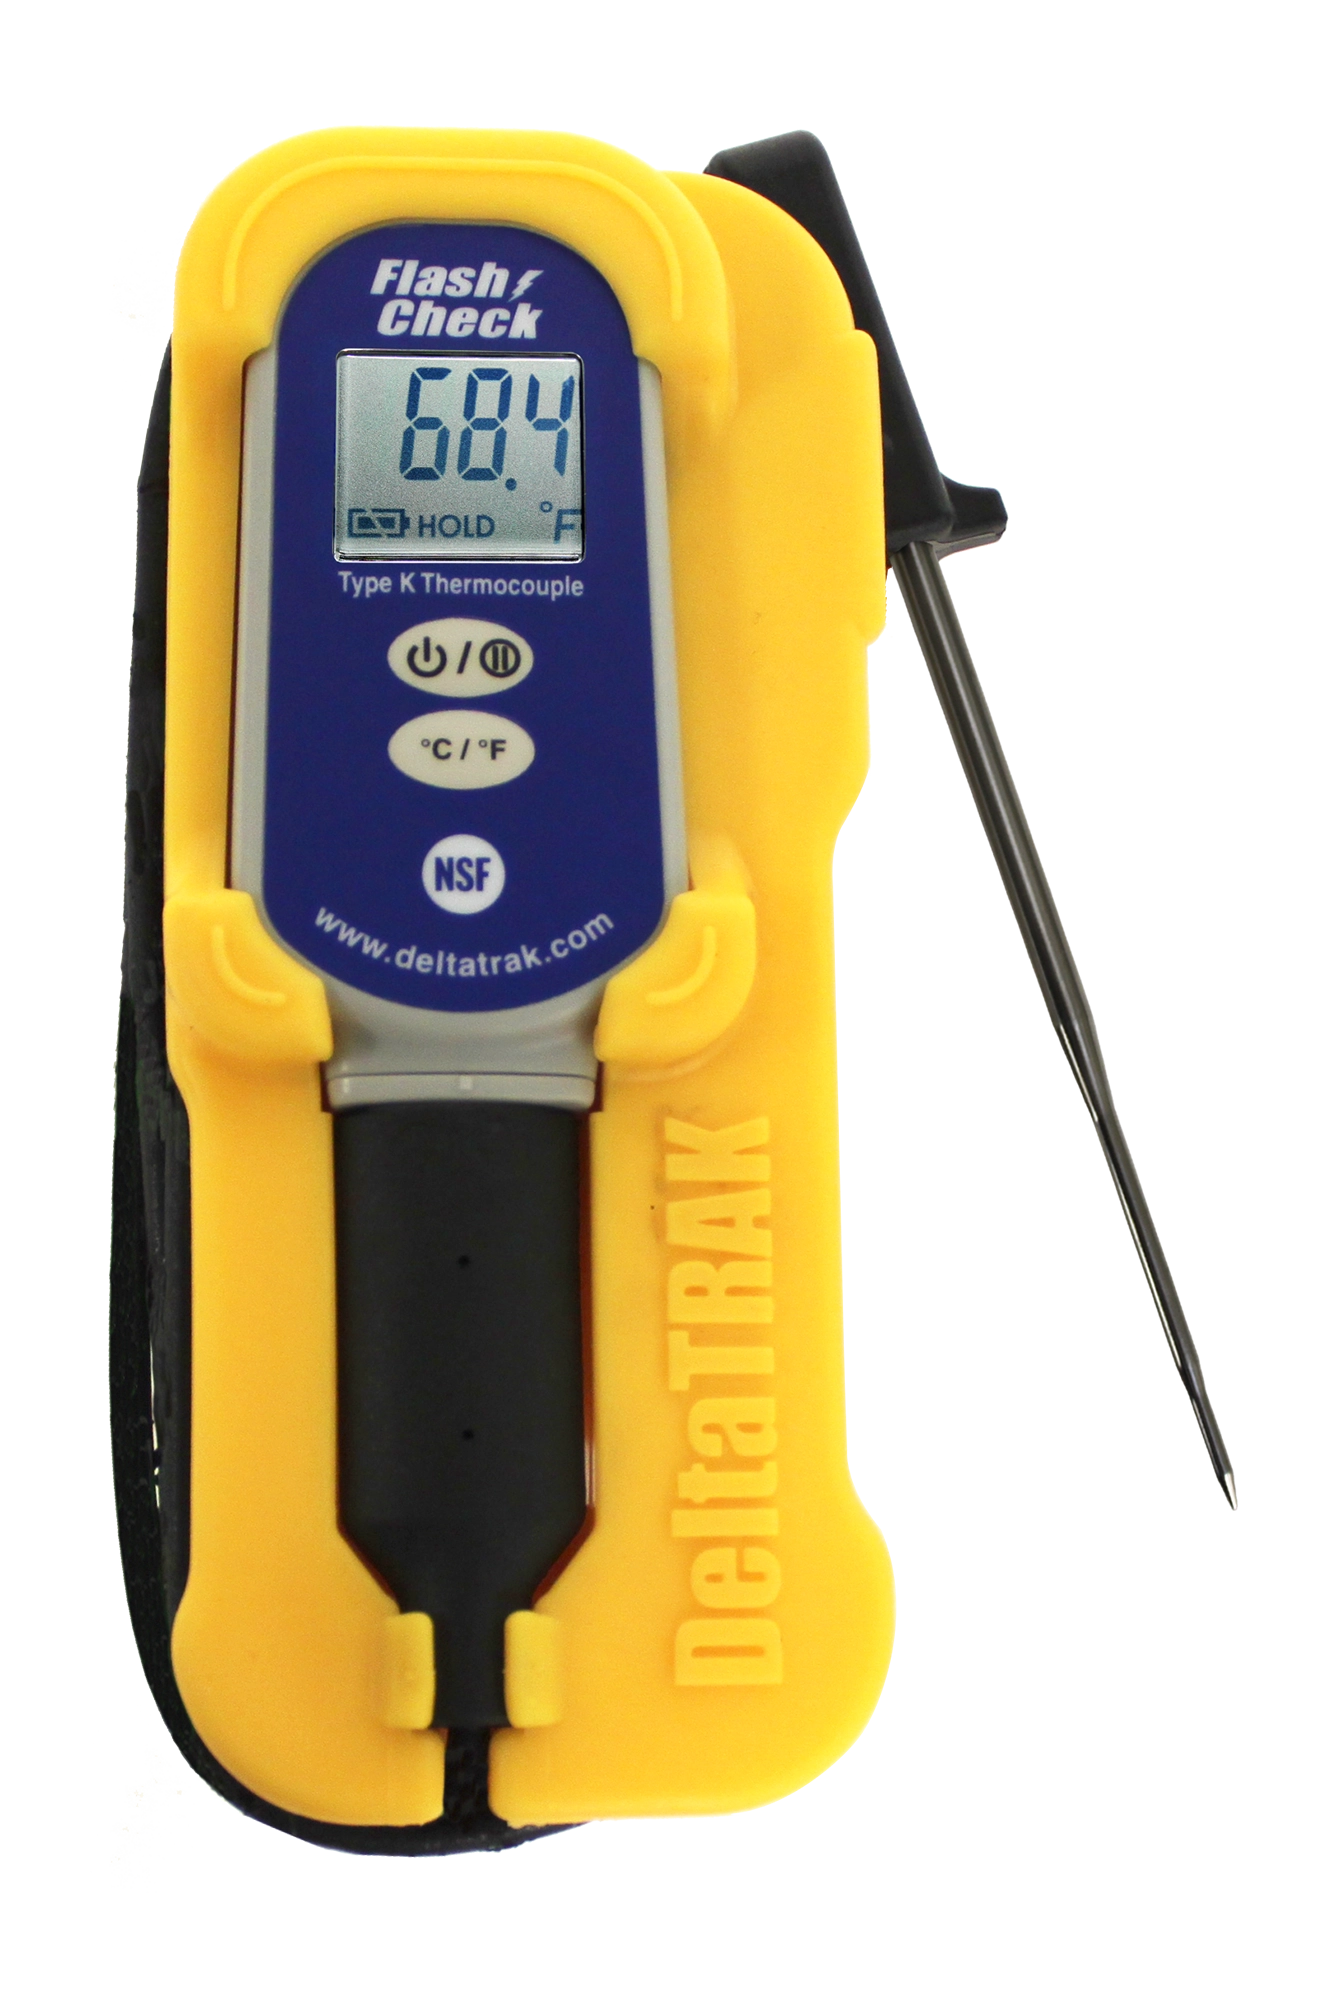 FlashCheck® Ruggy Thermocouple Thermometer Kit, Model 25050